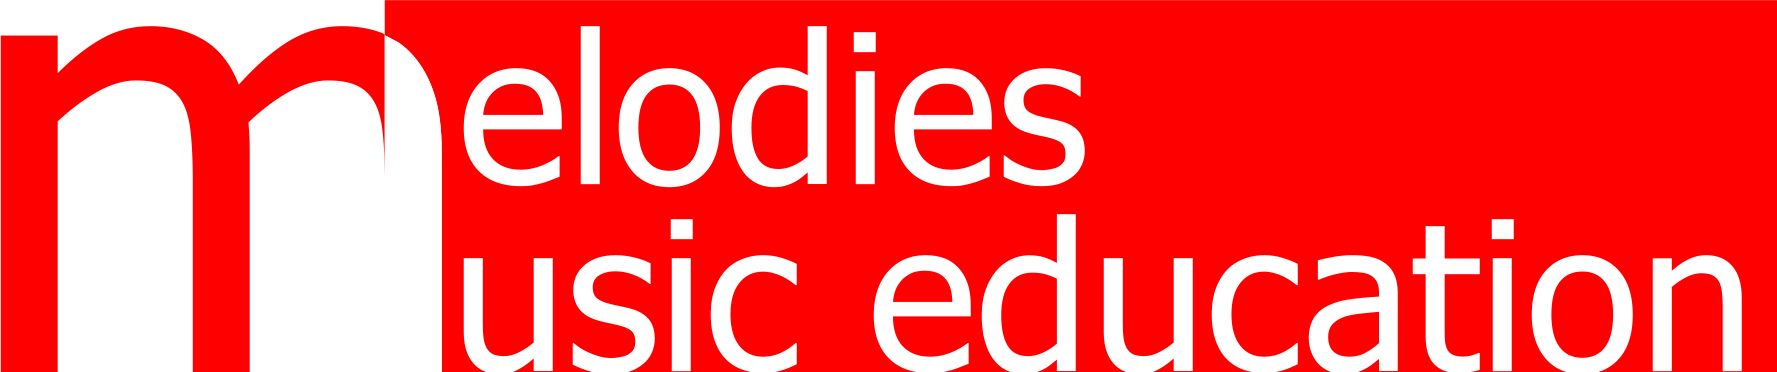 Melodies Music Education